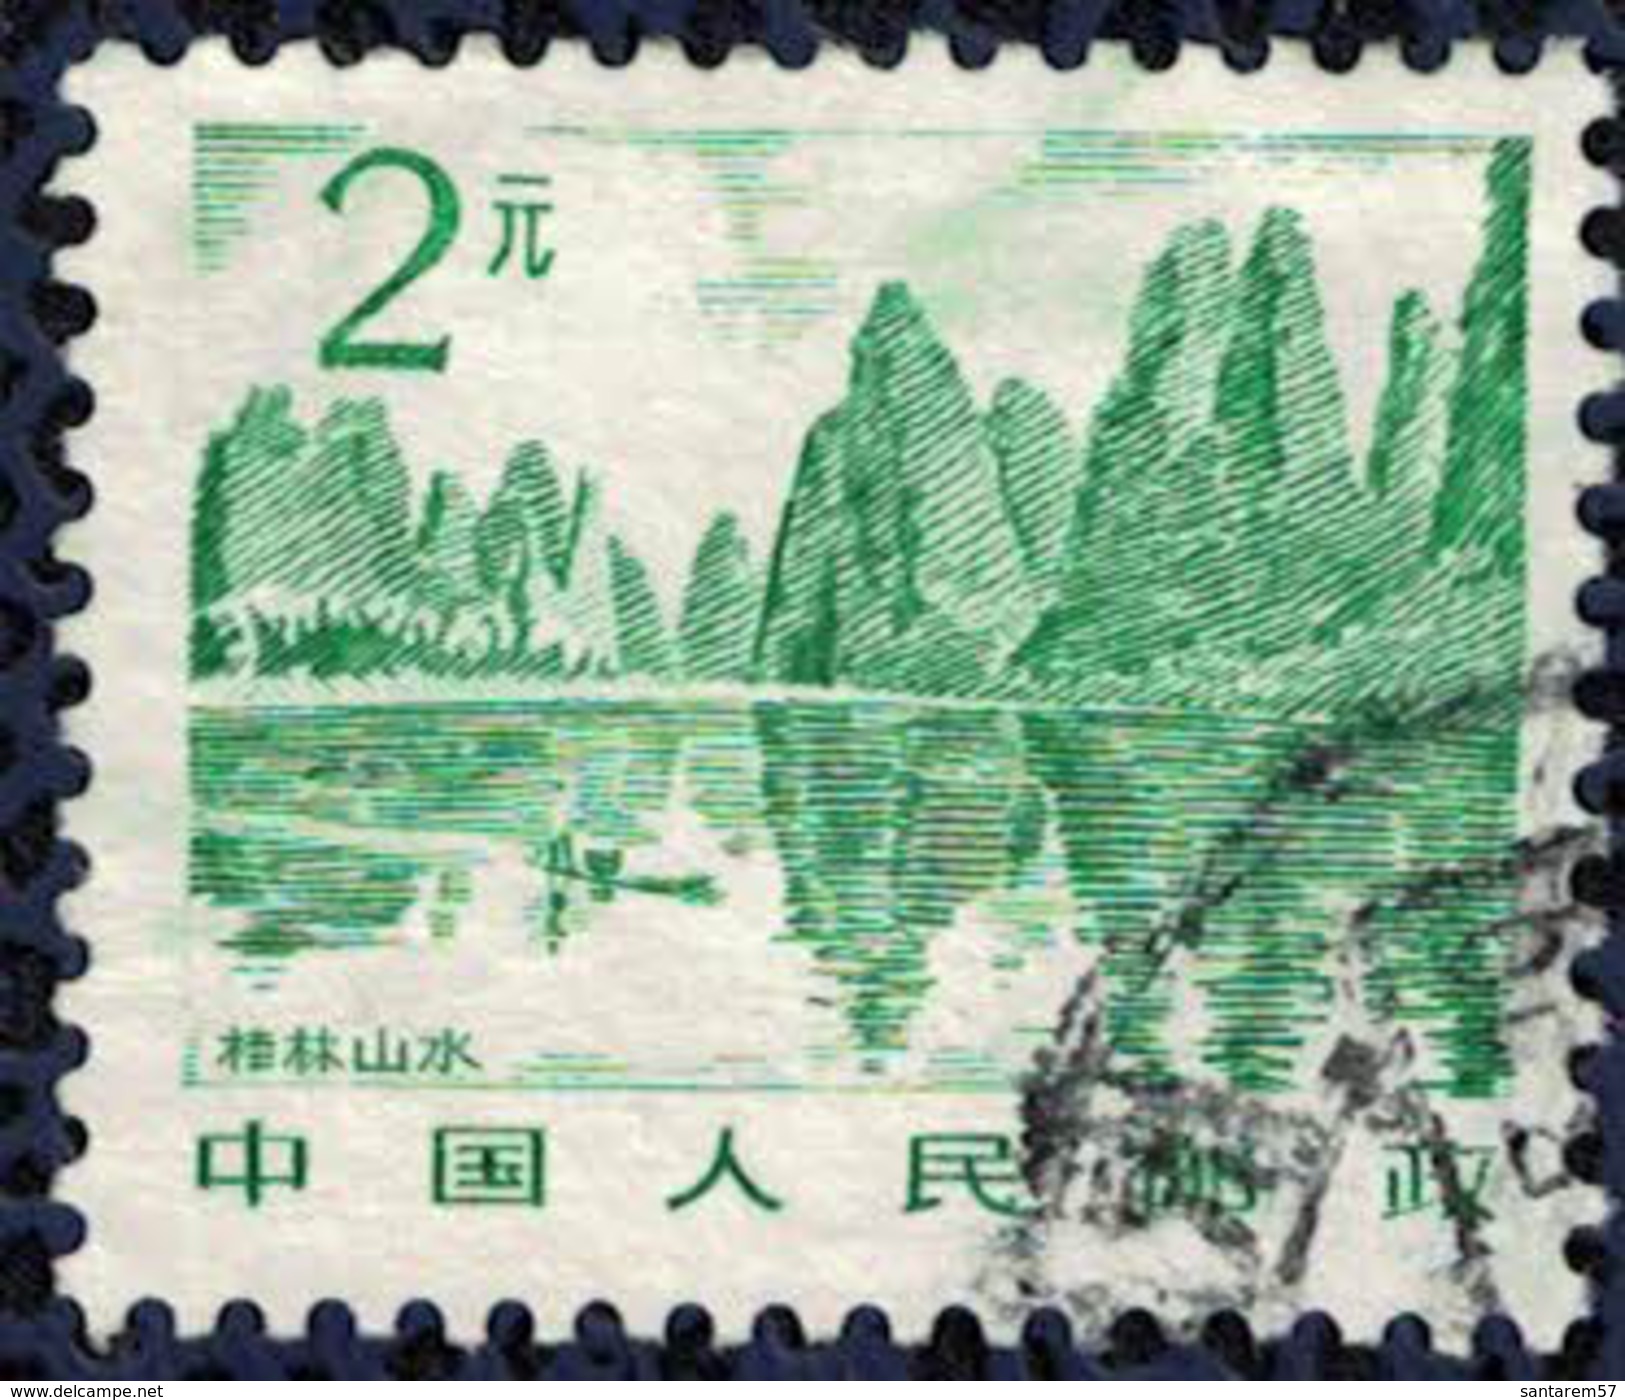 Chine 1982 Oblitération Ronde Used Guilin Paysage Lac Et Arbres - Used Stamps